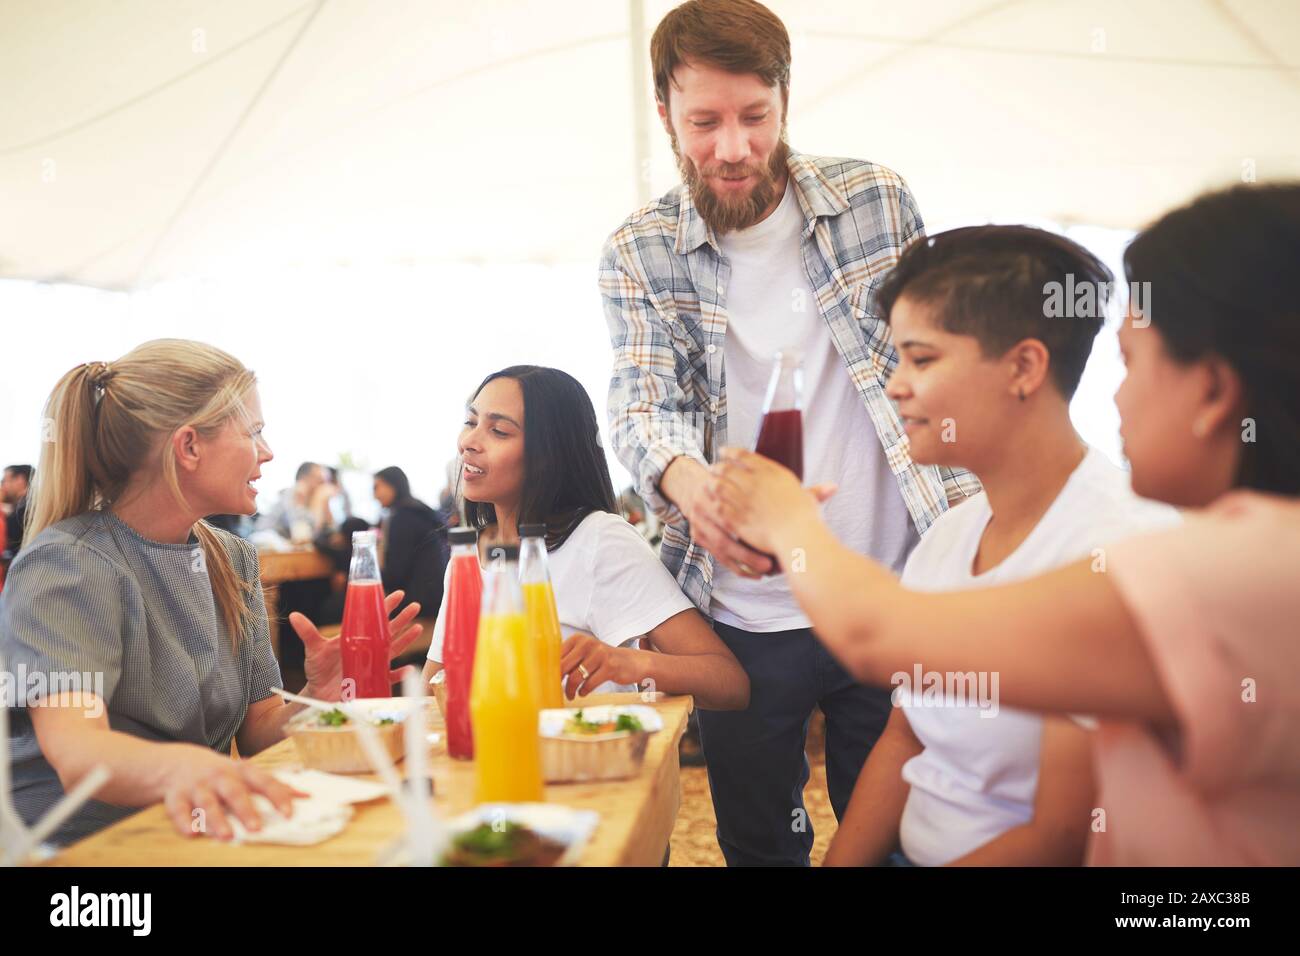 Man serving juice to friends at farmer’s market Stock Photo